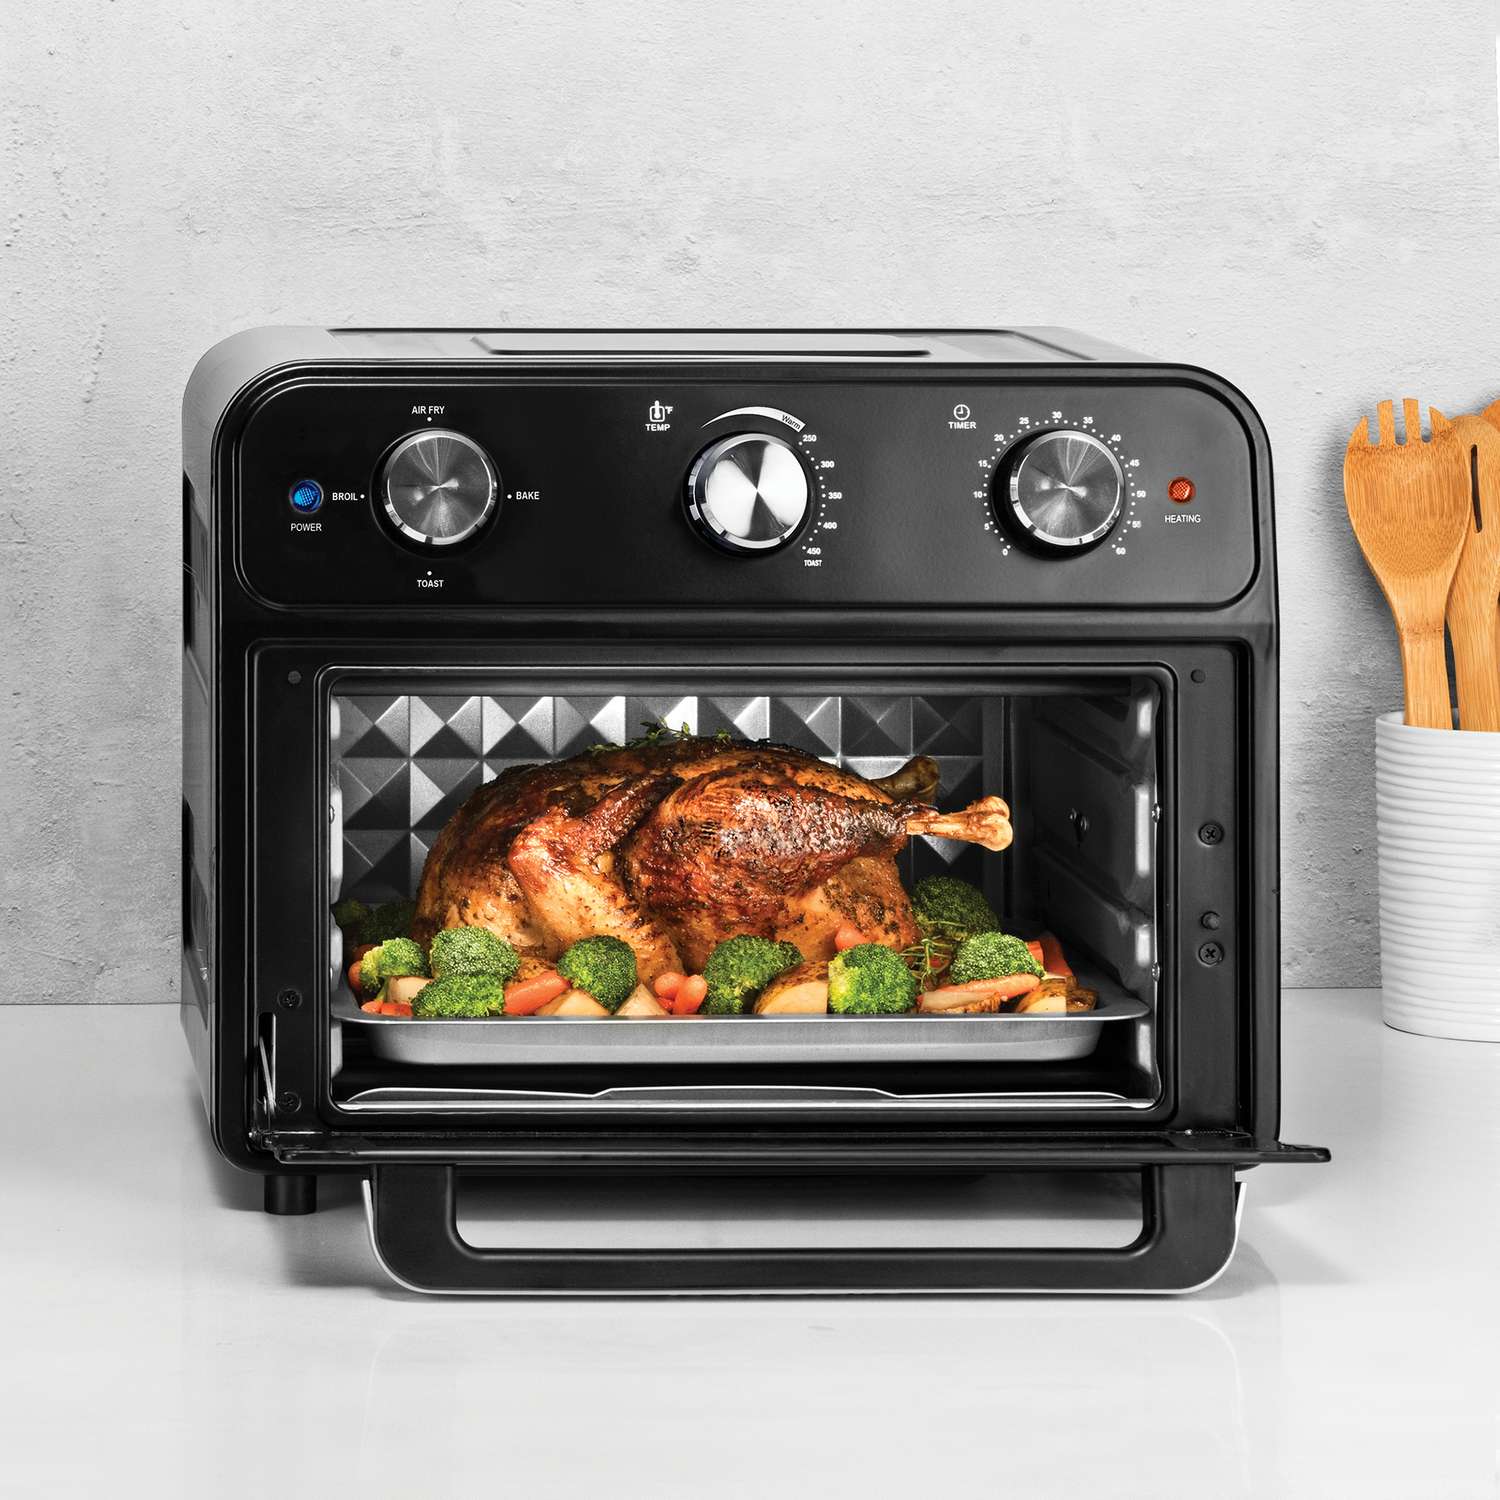 1pc Large Capacity Air Fryer with Non-Stick Coating for Low-Fat, Oil-Free  Cooking - Perfect for Roasting, Frying, and Baking - Easy to Clean and Ideal